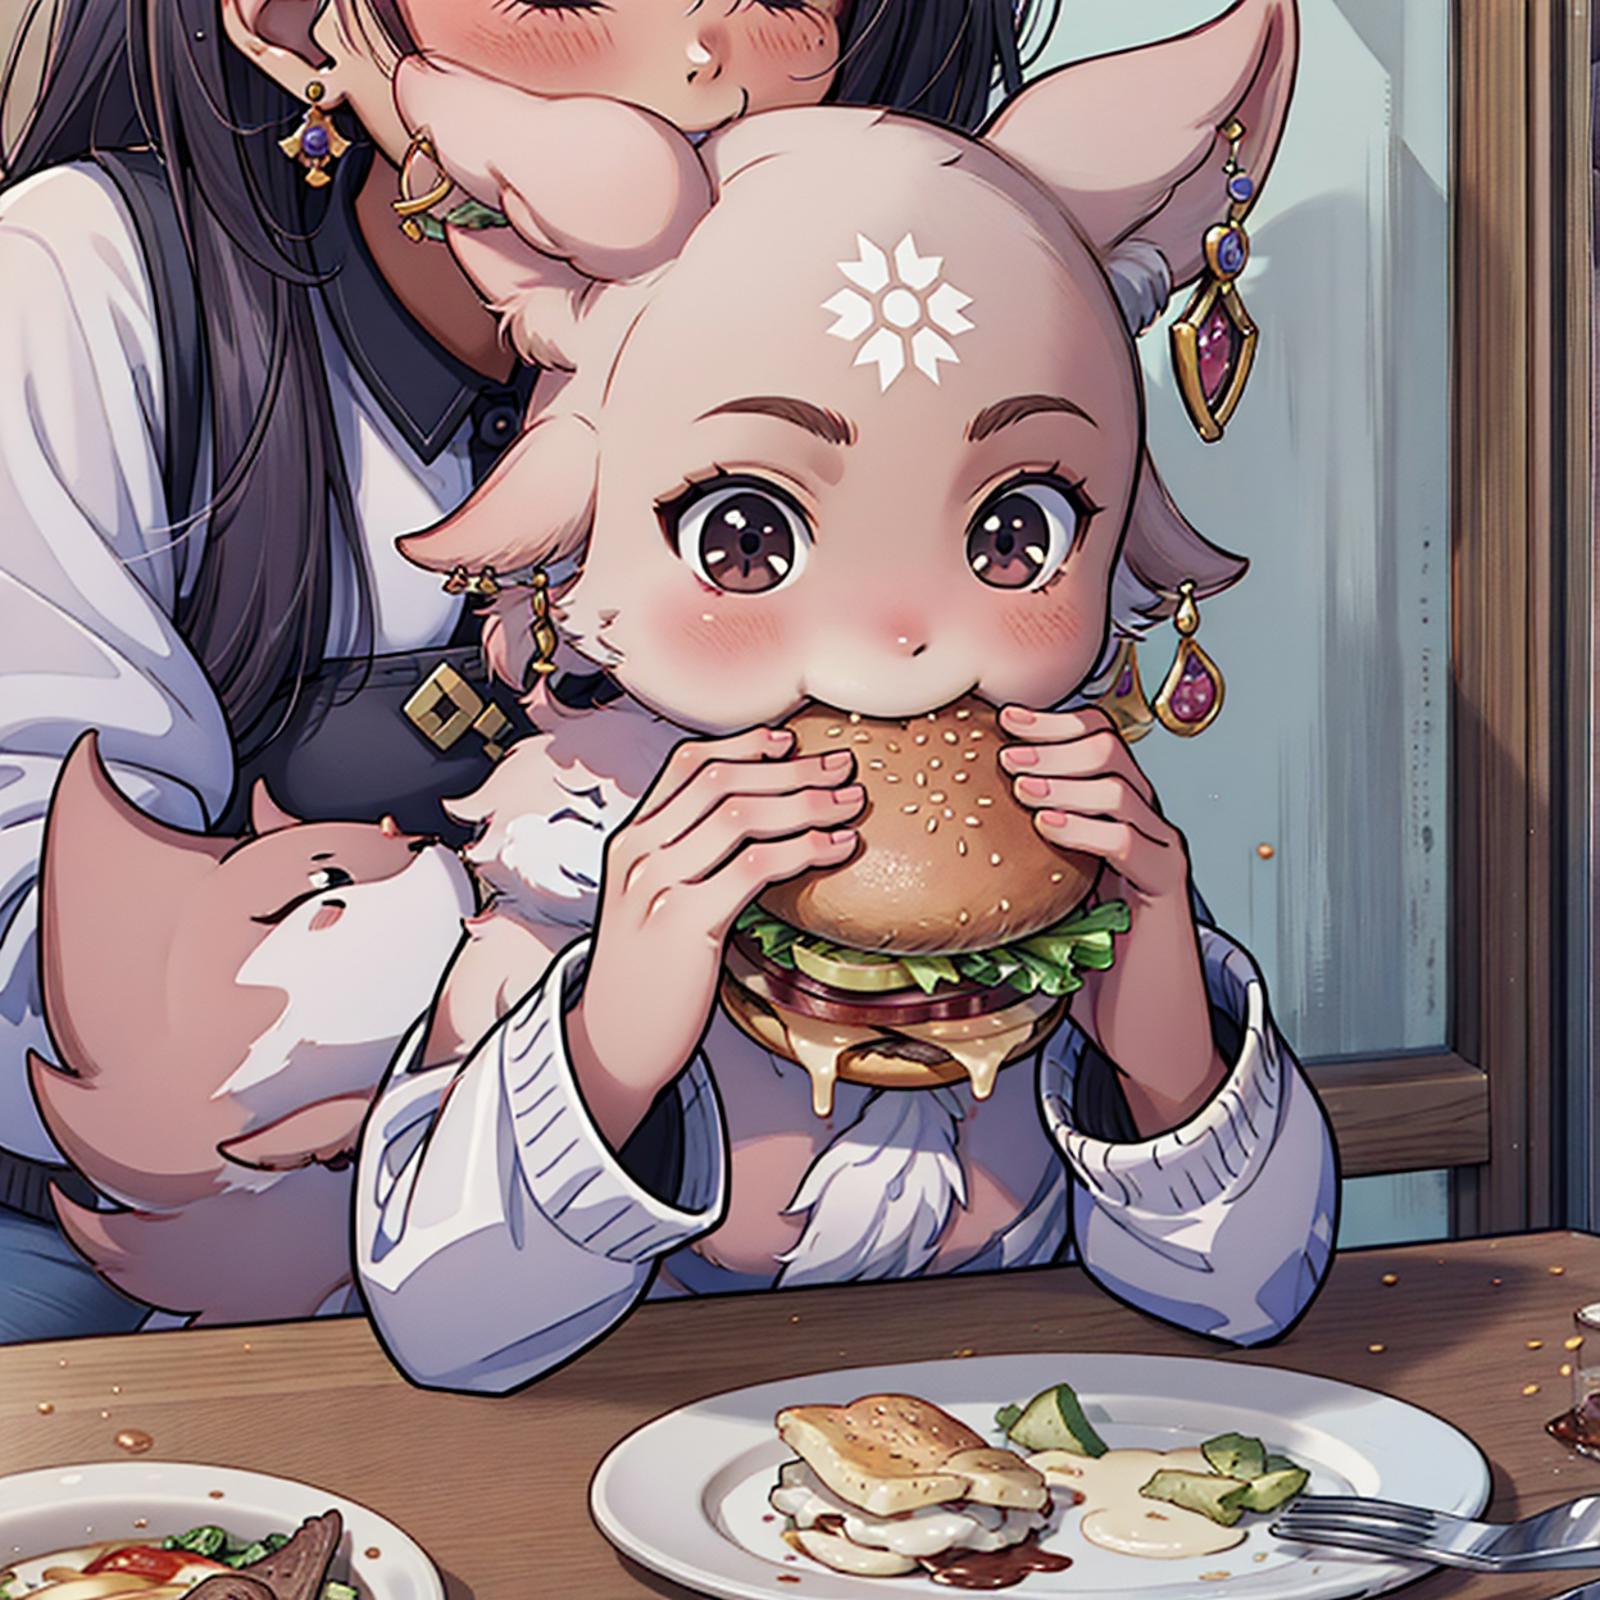 Huge Two-Handed Burger LoRA image by PotatCat